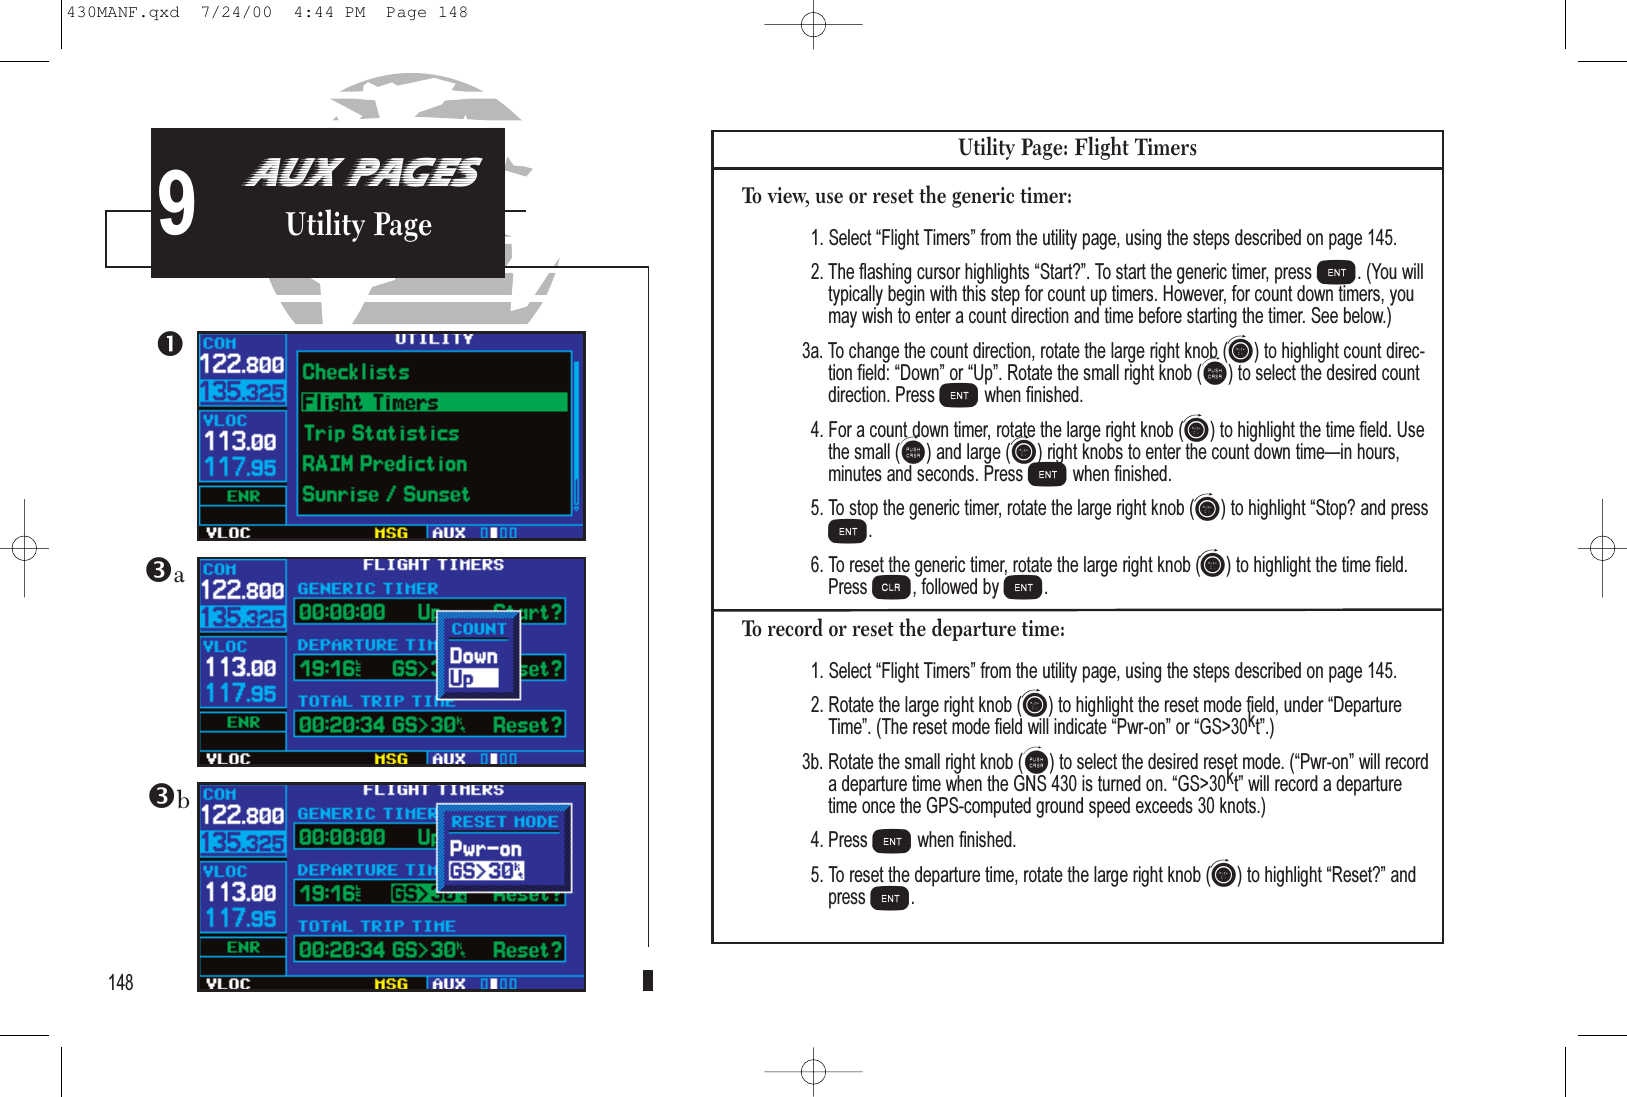 148AUX PAGESUtility Page9Utility Page: Flight TimersTo view, use or reset the generic timer:1. Select Flight Timers from the utility page, using the steps described on page 145.2. The flashing cursor highlights Start?. To start the generic timer, press E. (You willtypically begin with this step for count up timers. However, for count down timers, youmay wish to enter a count direction and time before starting the timer. See below.)3a. To change the count direction, rotate the large right knob (h) to highlight count direc-tion field: Down or Up. Rotate the small right knob (a) to select the desired countdirection. Press Ewhen finished. 4. For a count down timer, rotate the large right knob (h) to highlight the time field. Usethe small (a) and large (h) right knobs to enter the count down timein hours, minutes and seconds. Press Ewhen finished. 5. To stop the generic timer, rotate the large right knob (h) to highlight Stop? and pressE. 6. To reset the generic timer, rotate the large right knob (h) to highlight the time field.Press c, followed by E.To record or reset the departure time:1. Select Flight Timers from the utility page, using the steps described on page 145.2. Rotate the large right knob (h) to highlight the reset mode field, under DepartureTime. (The reset mode field will indicate Pwr-on or GS&gt;30kt.)3b. Rotate the small right knob (a) to select the desired reset mode. (Pwr-on will record a departure time when the GNS 430 is turned on. GS&gt;30kt will record a departure time once the GPS-computed ground speed exceeds 30 knots.)4. Press Ewhen finished.5. To reset the departure time, rotate the large right knob (h) to highlight Reset? andpress E.ba430MANF.qxd  7/24/00  4:44 PM  Page 148